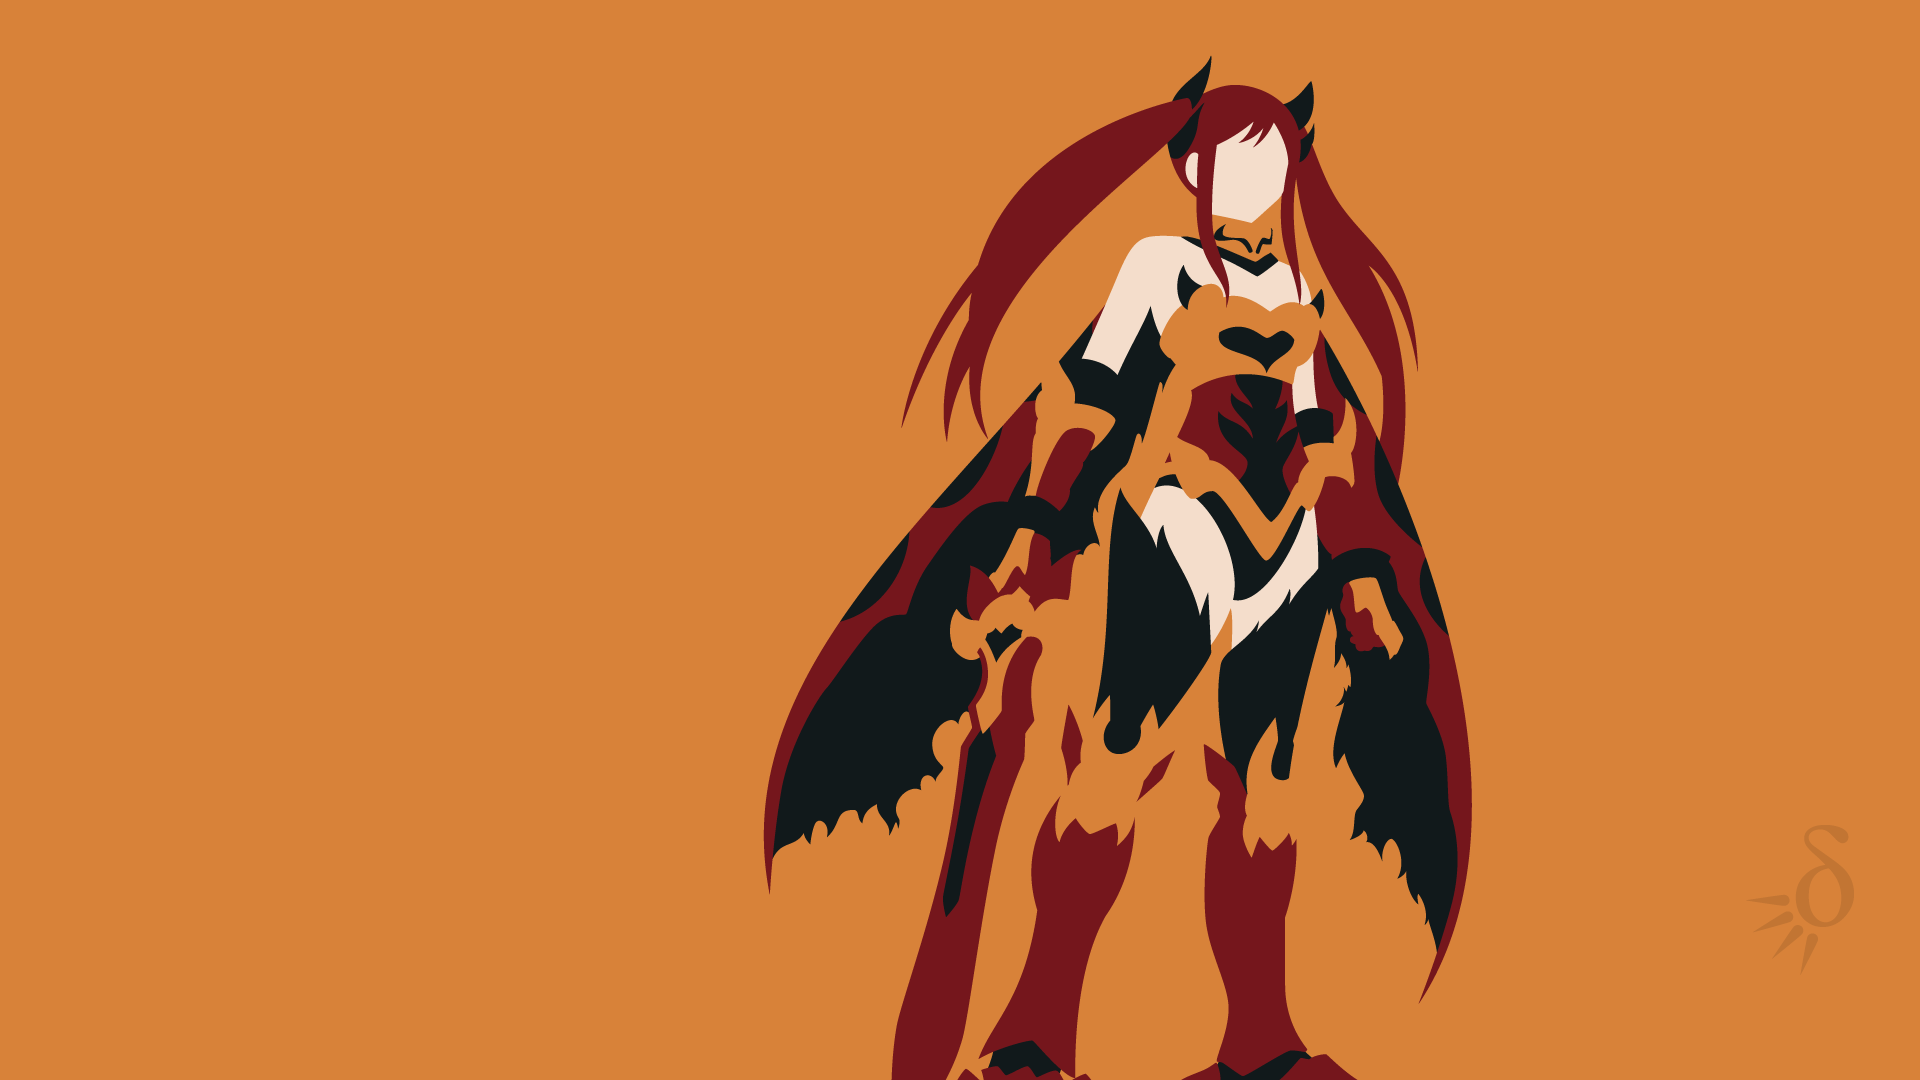 Anime 1920x1080 anime girls orange background anime simple background standing women with swords Scarlet Erza Fairy Tail